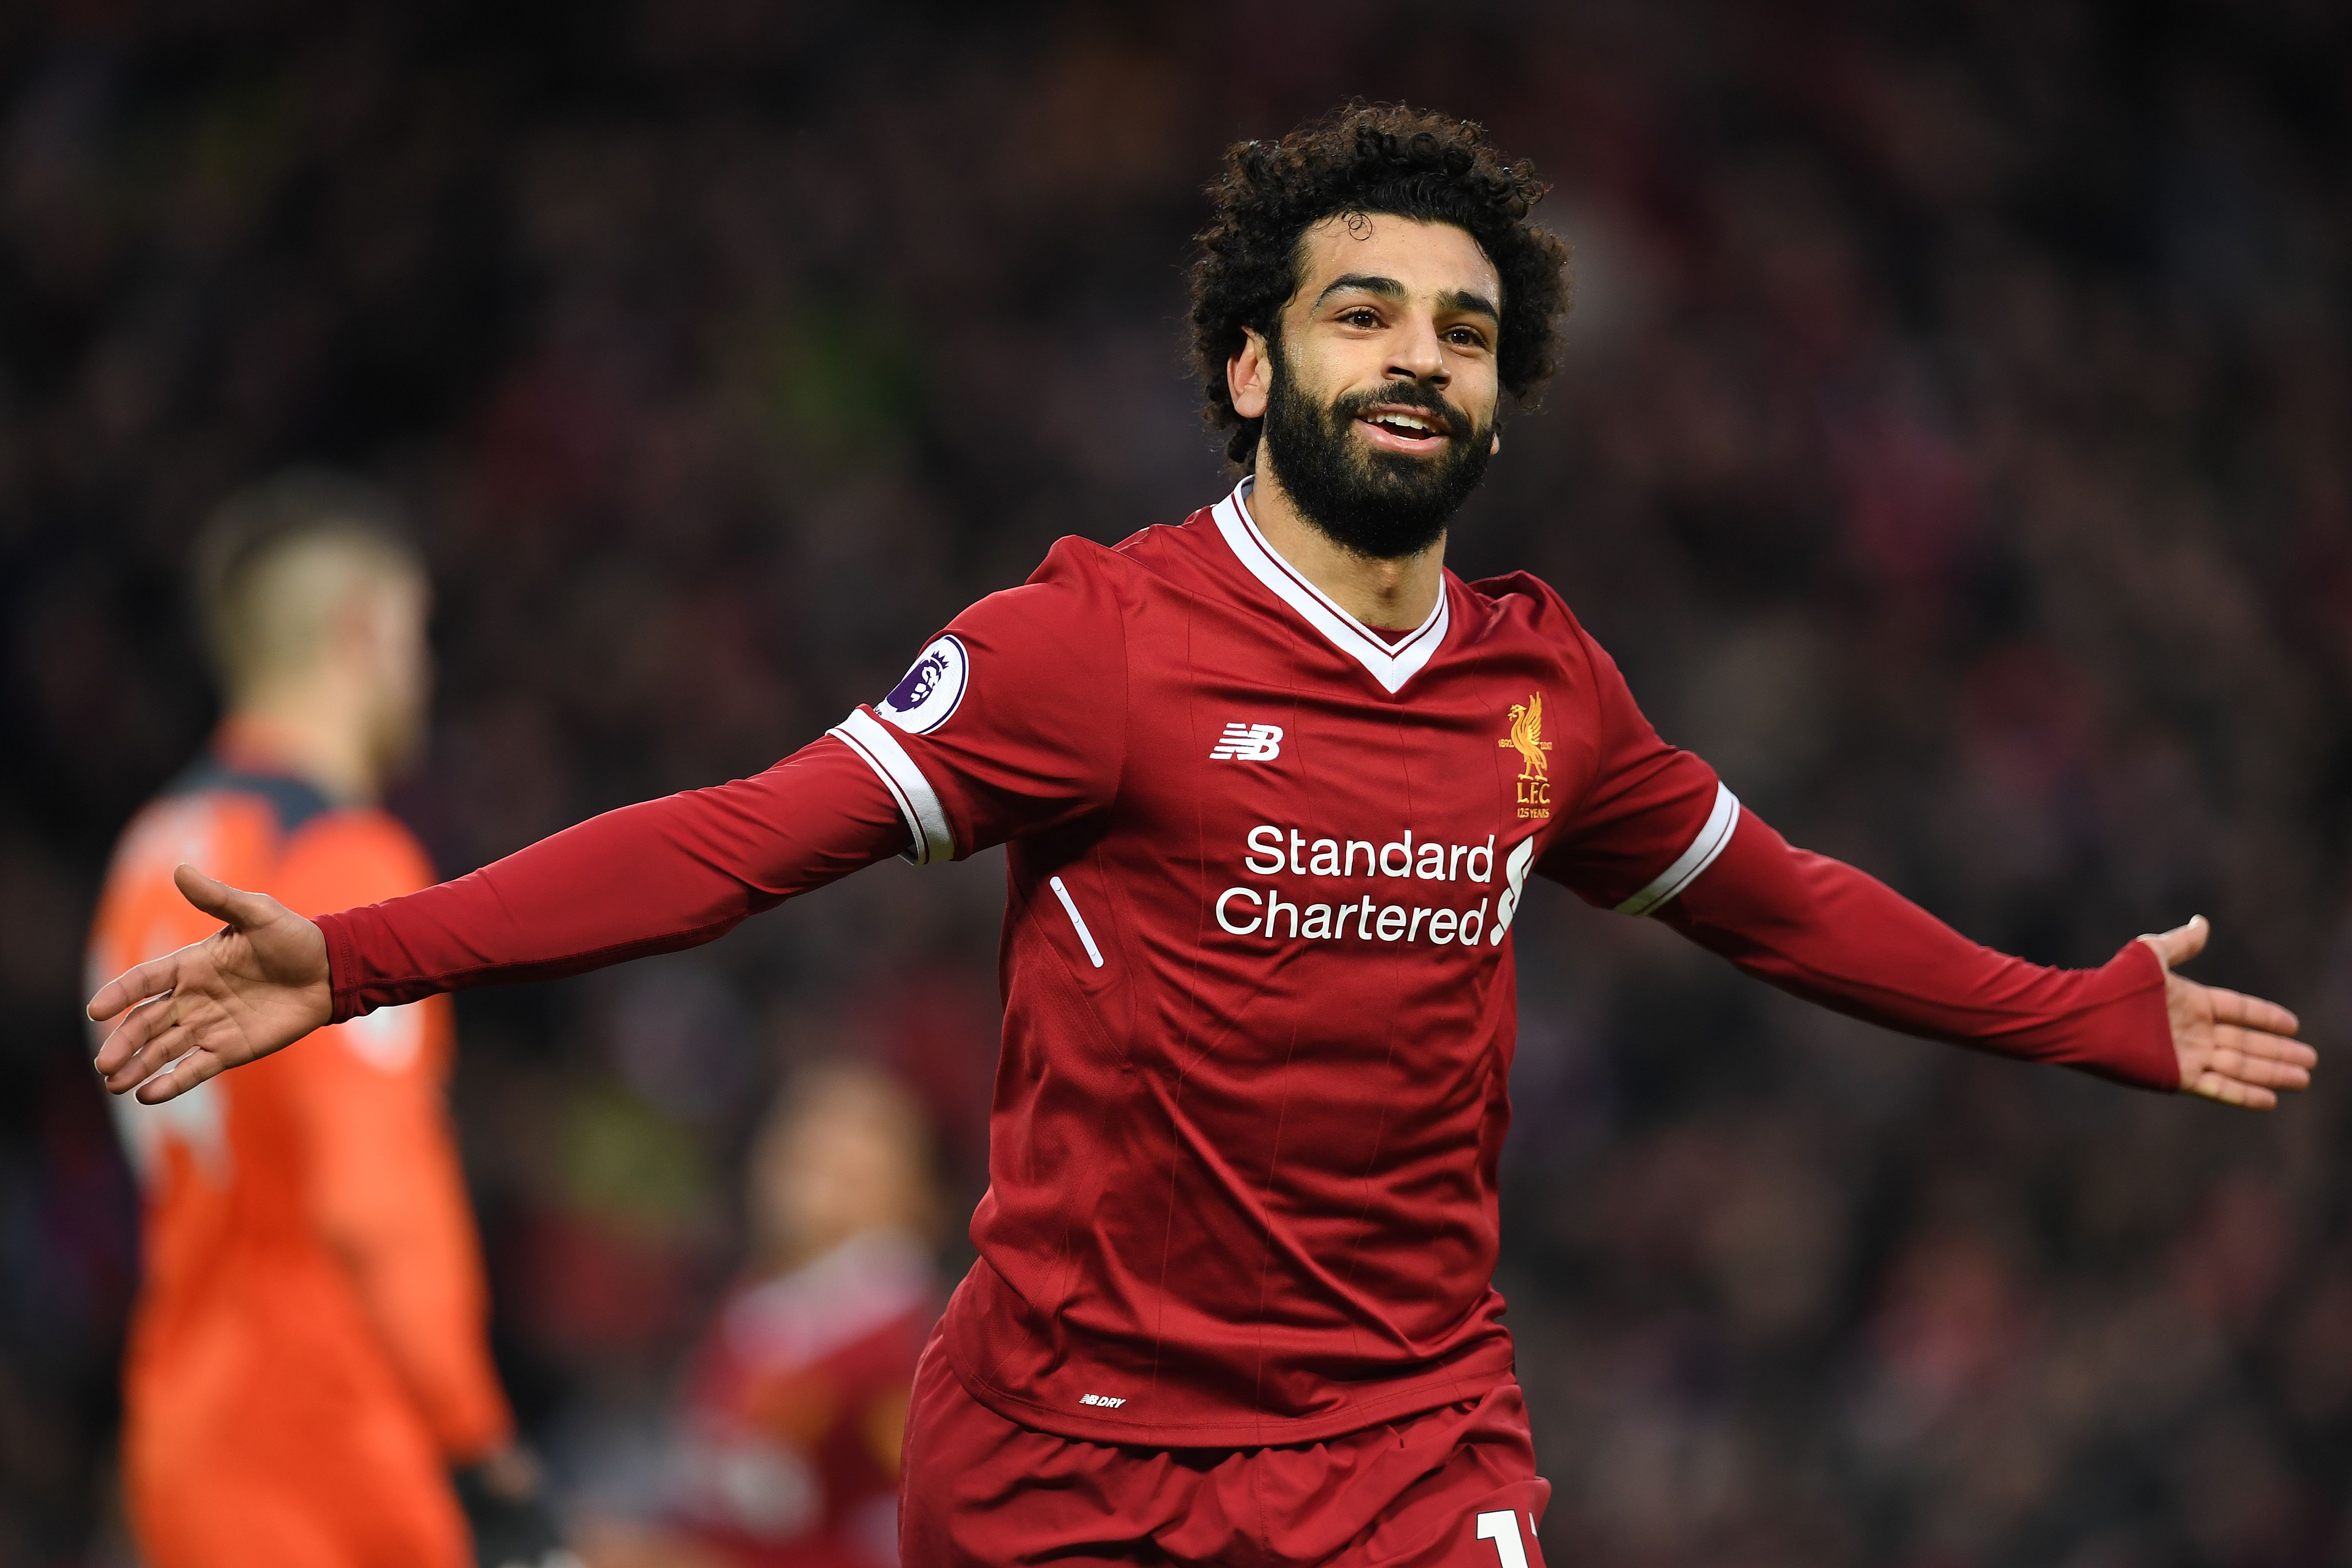 Liverpool's Egyptian midfielder Mohamed Salah celebrates scoring his team's second goal during the English Premier League football match between Liverpool and Southampton at Anfield in Liverpool, north west England on November 18, 2017. / AFP PHOTO / Paul ELLIS / RESTRICTED TO EDITORIAL USE. No use with unauthorized audio, video, data, fixture lists, club/league logos or 'live' services. Online in-match use limited to 75 images, no video emulation. No use in betting, games or single club/league/player publications.  /         (Photo credit should read PAUL ELLIS/AFP/Getty Images)